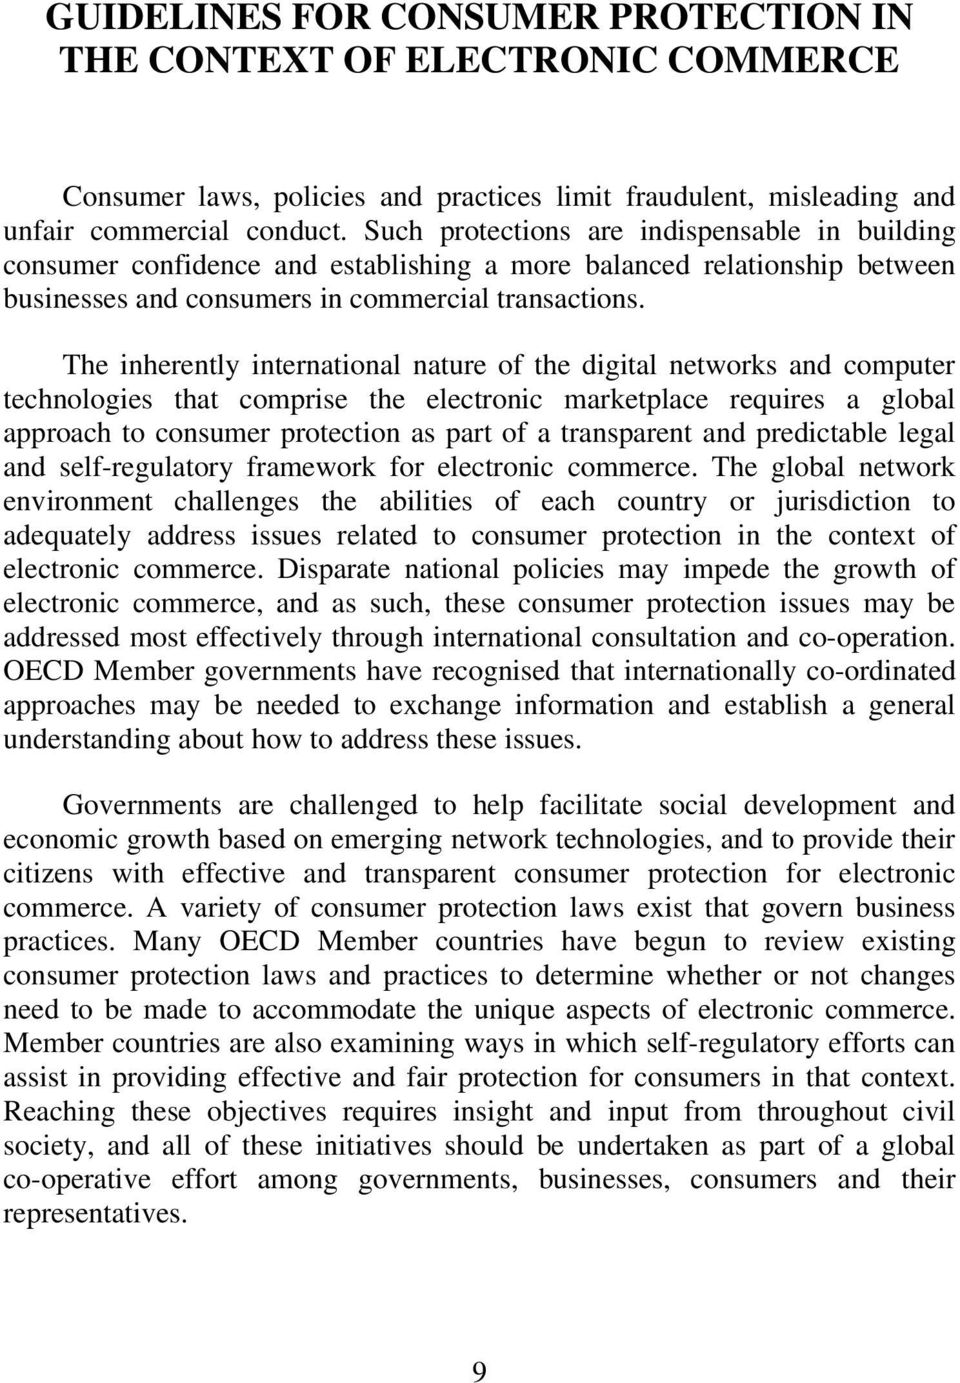 The inherently international nature of the digital networks and computer technologies that comprise the electronic marketplace requires a global approach to consumer protection as part of a